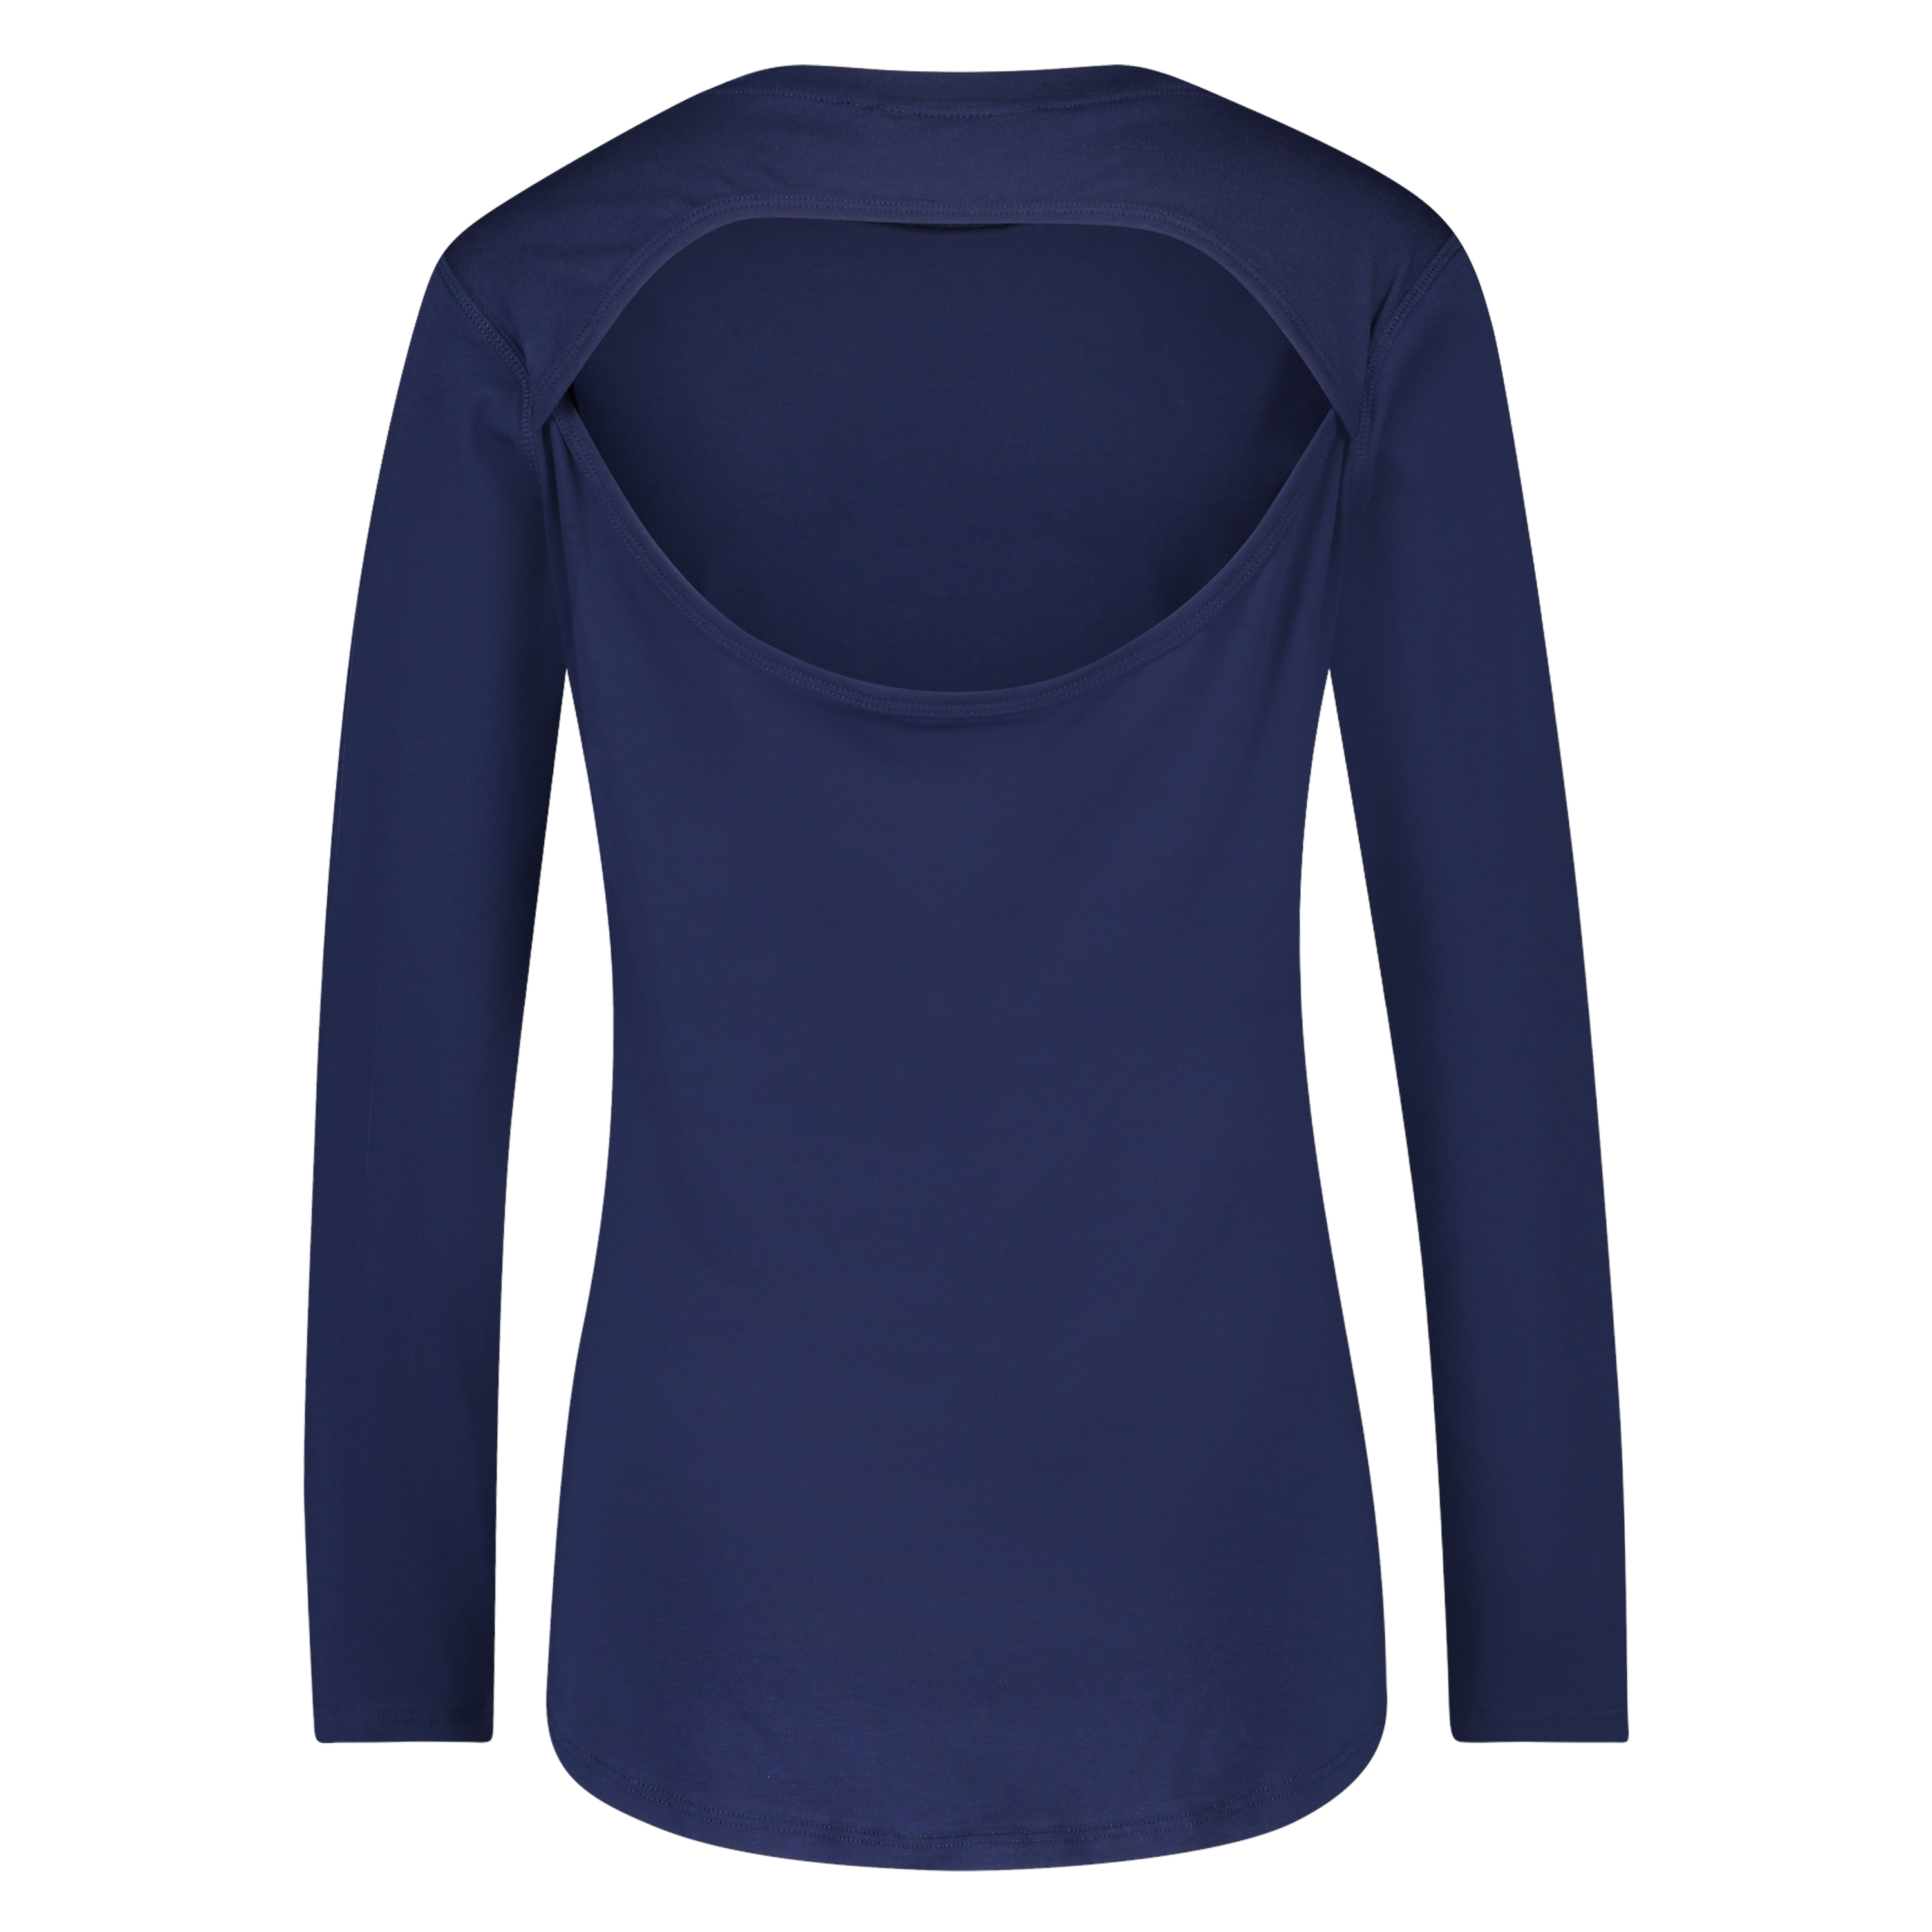 HKMX Strappy Basic Long-Sleeved Sports Top , Blue, main